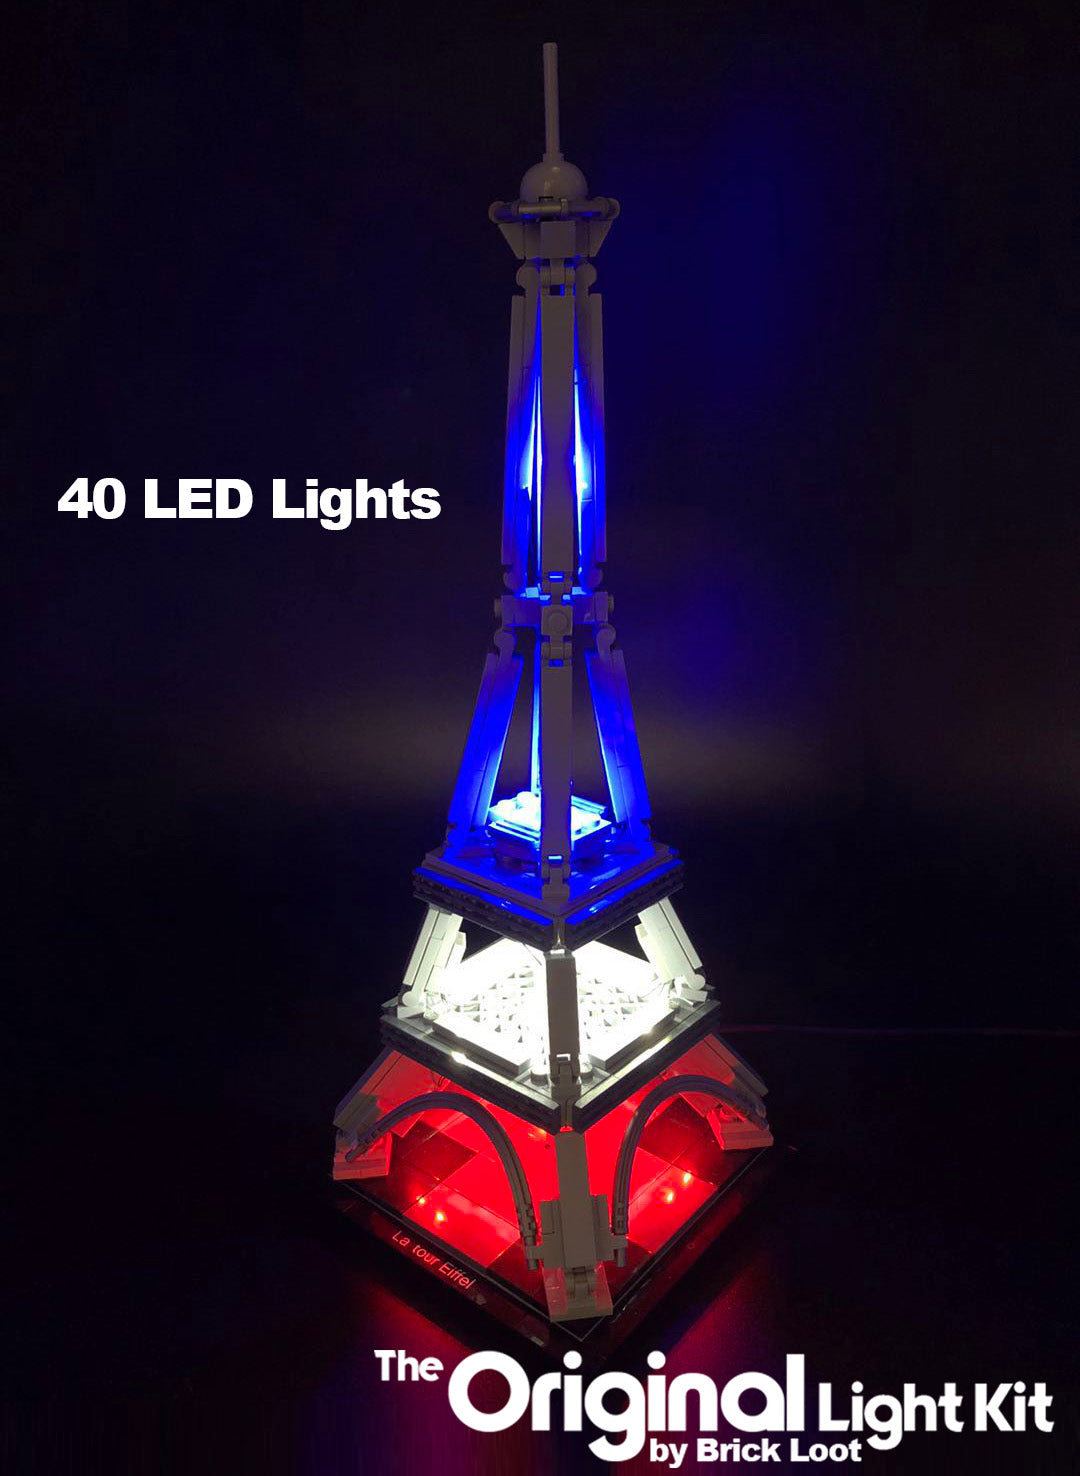 LEGO Architecture Eiffel Tower set 21019 with the beautiful Brick Loot LED Light Kit installed!